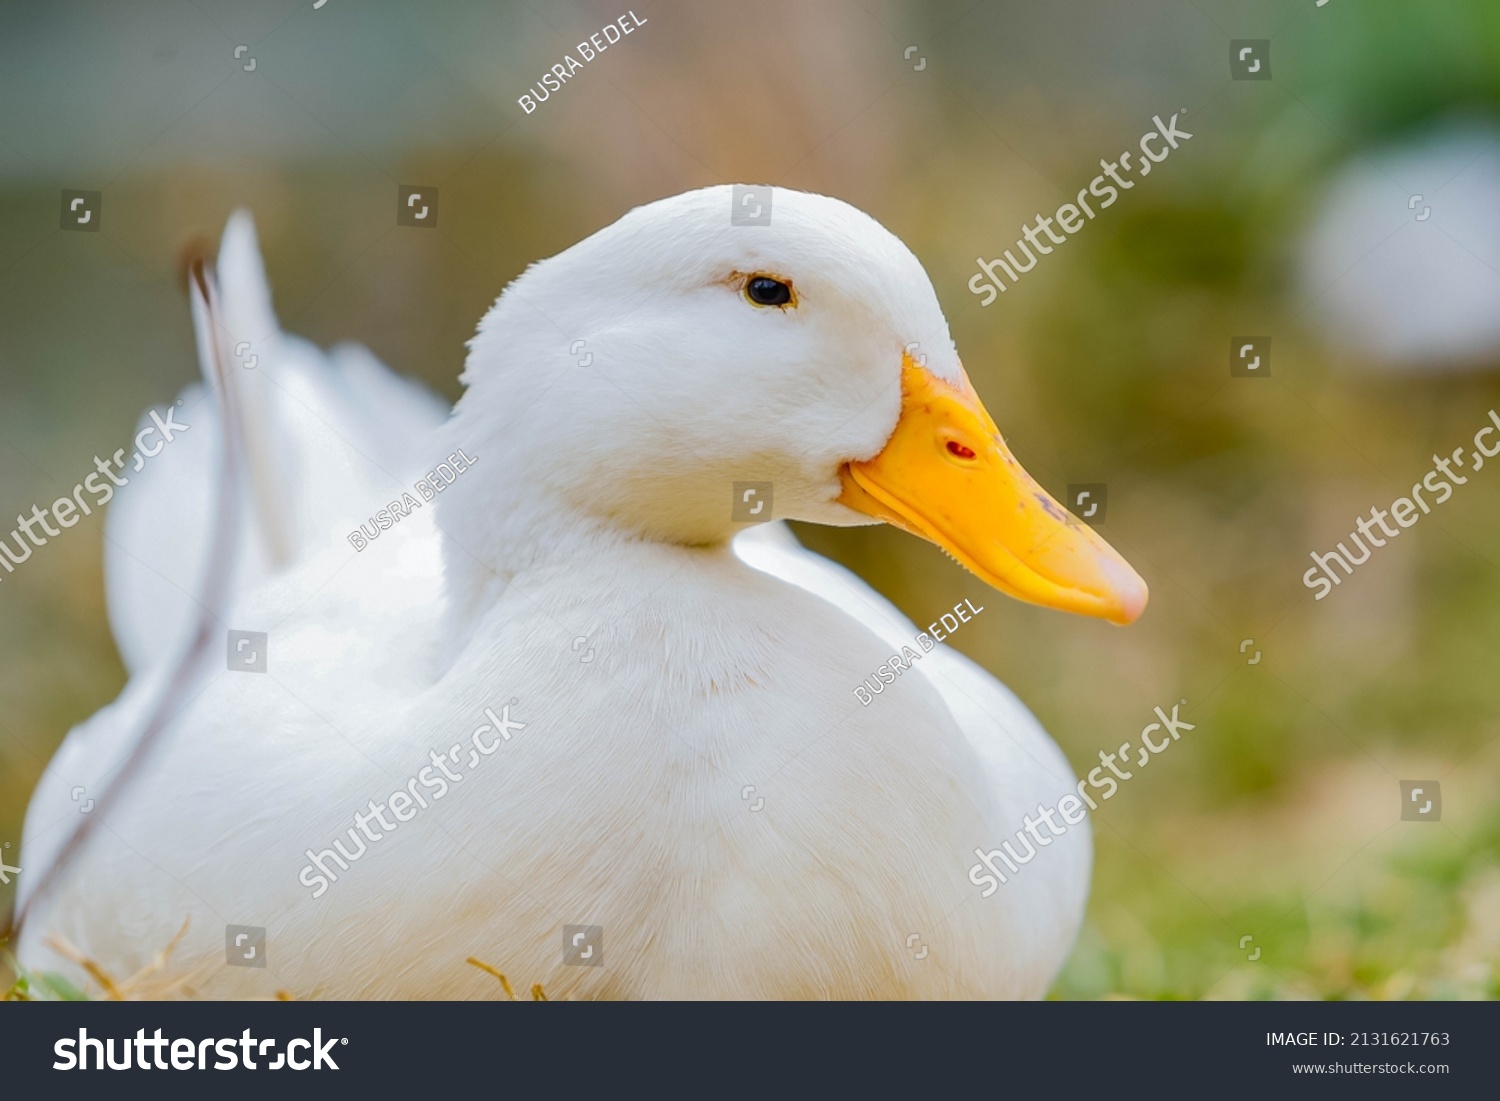 cute and majestic duck with white feathers and yellow beak is sitting by the lake. Macro shot. animal life. #2131621763